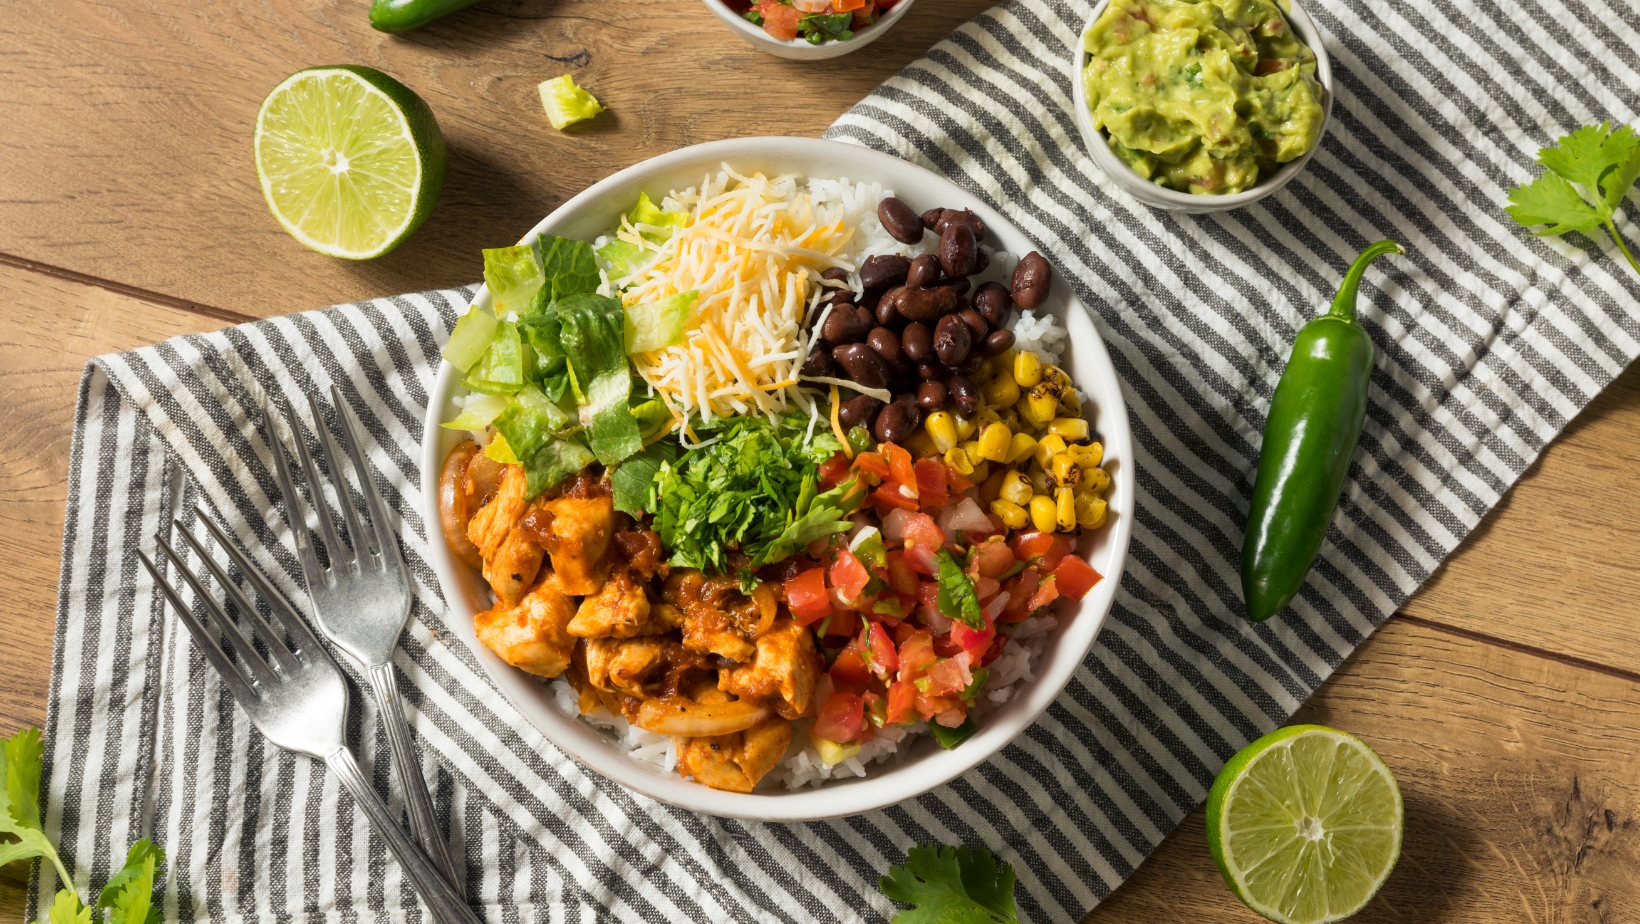 A chicken burrito with cilantro lime rice. In the bowl you can see chicken, tomatoes, corn, black beans and cheese.